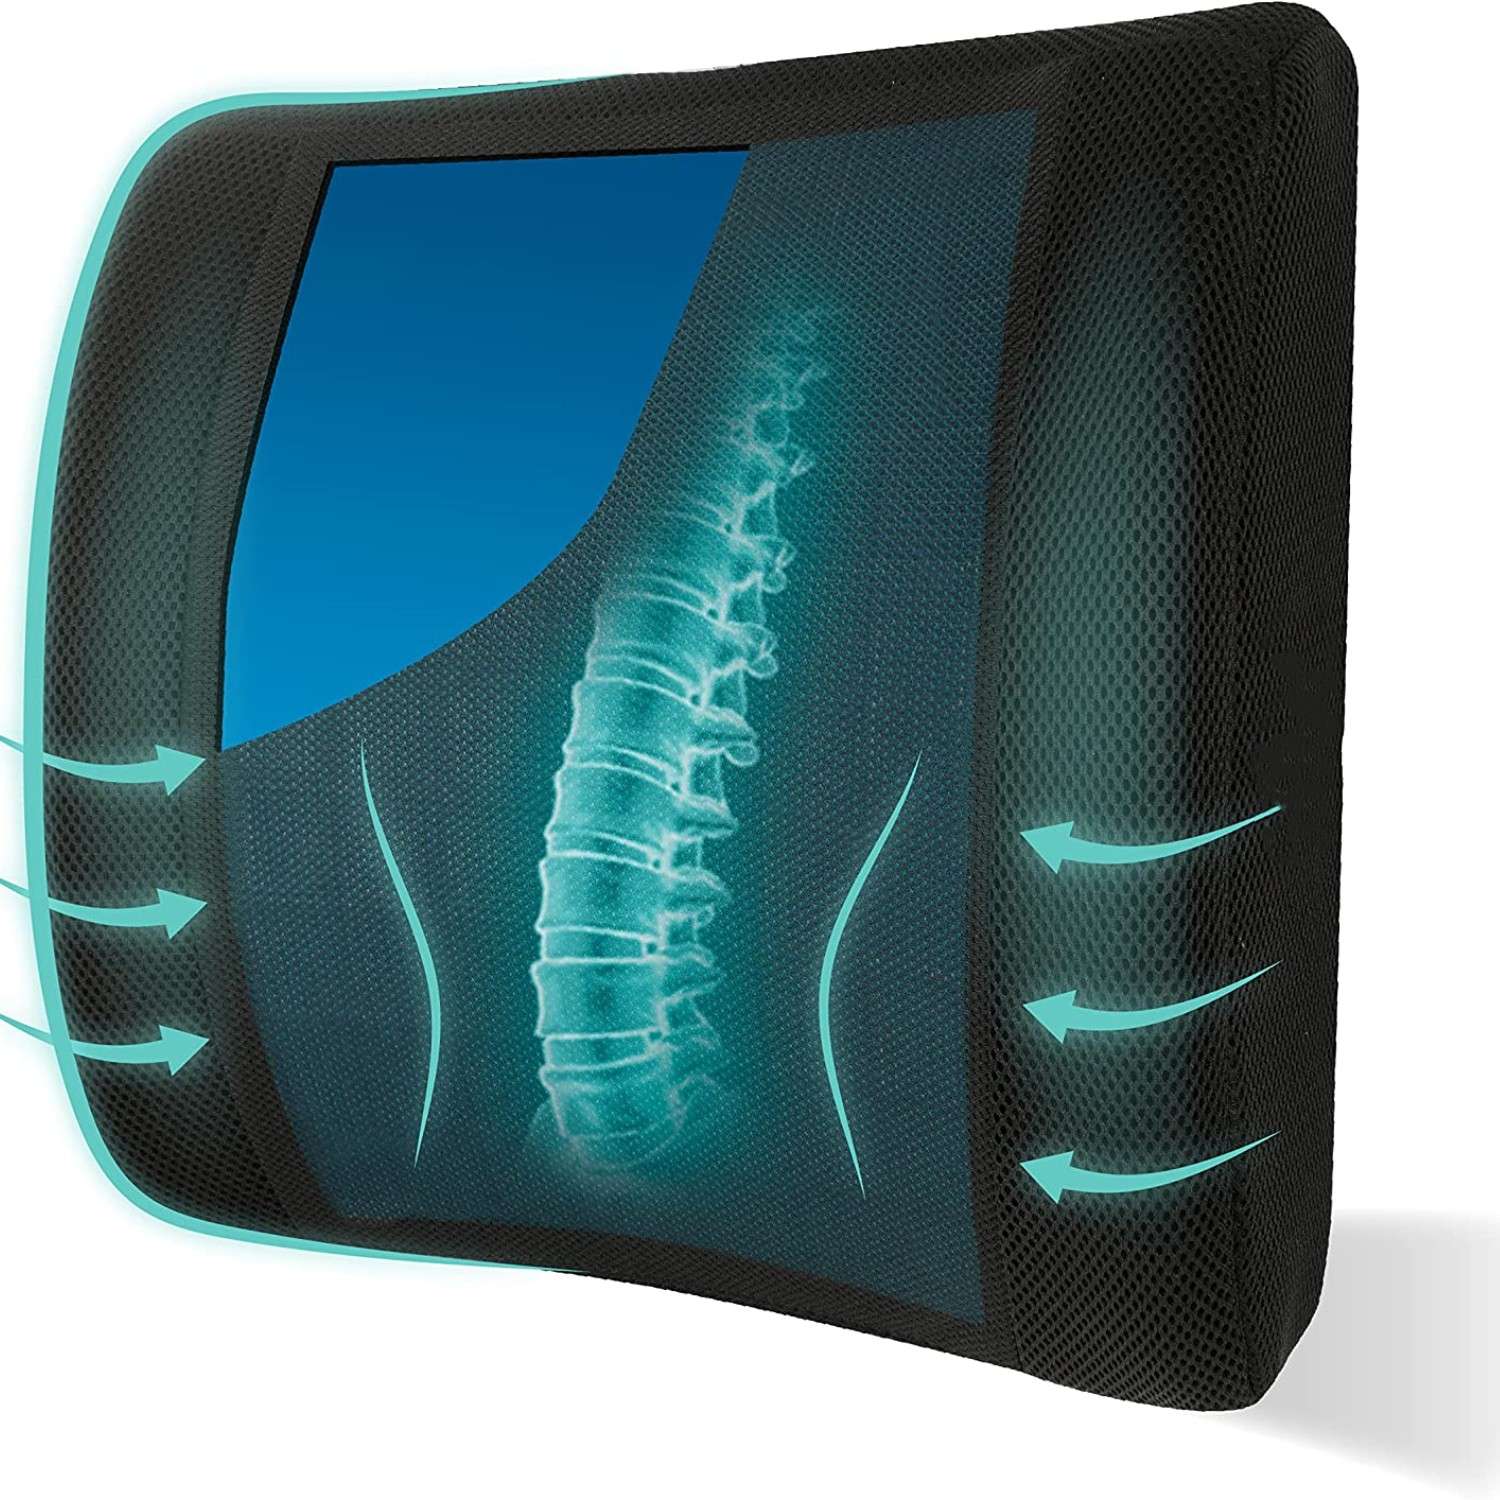 Cooling Gel Seat Cushion for Relaxation and Com...